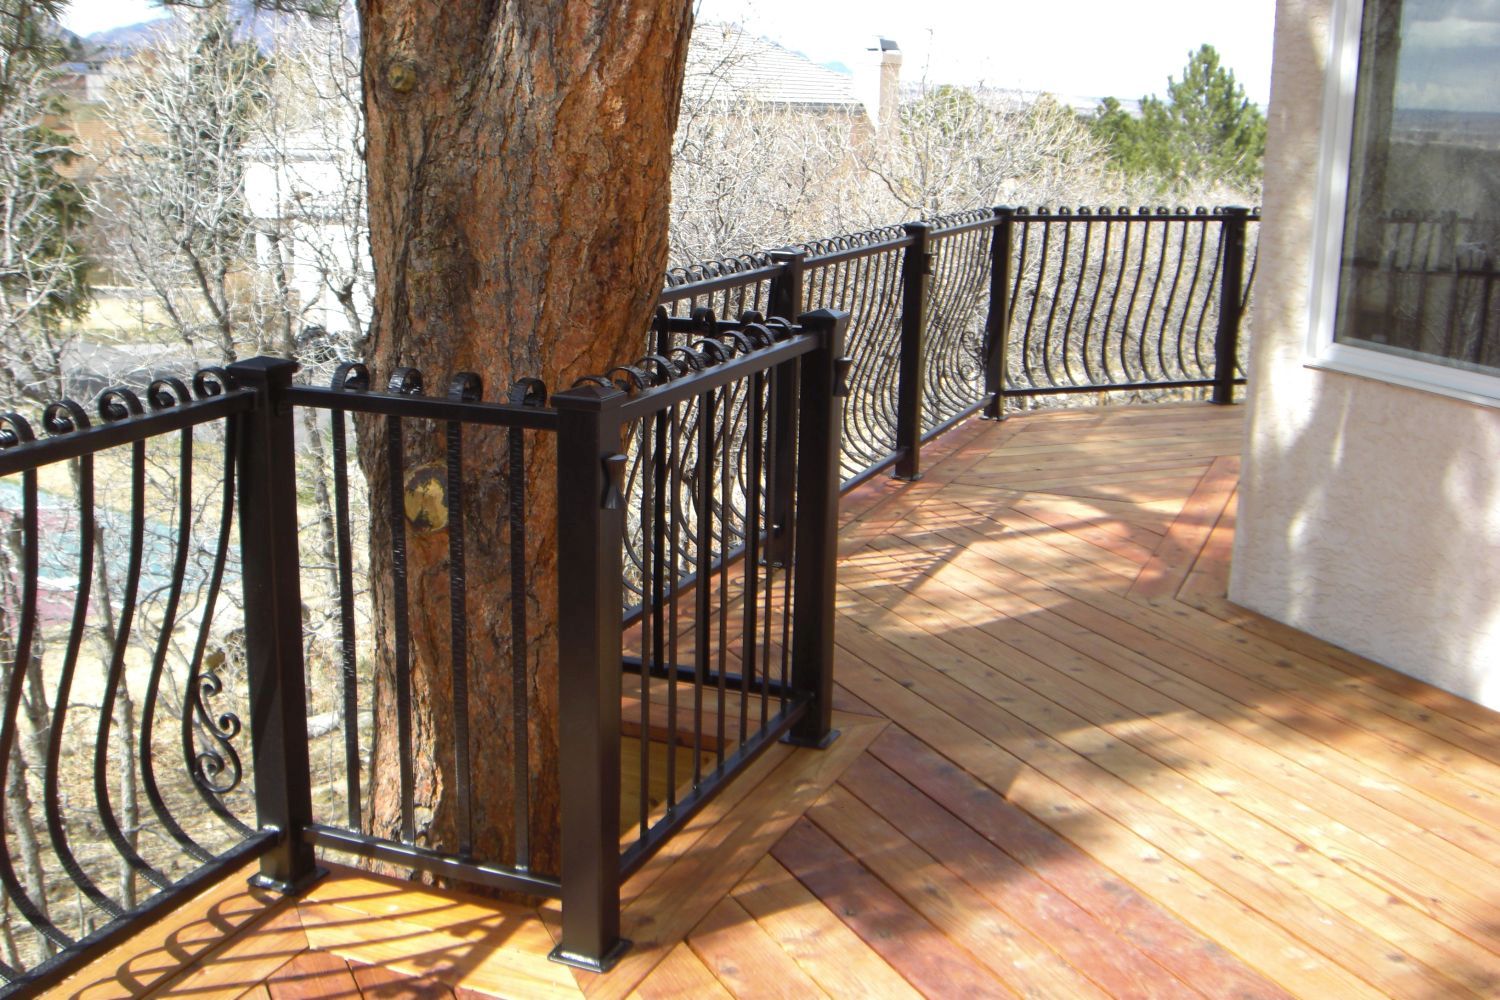 Heart Redwood deck (unstained) that was built to accommodate an existing shade tree.